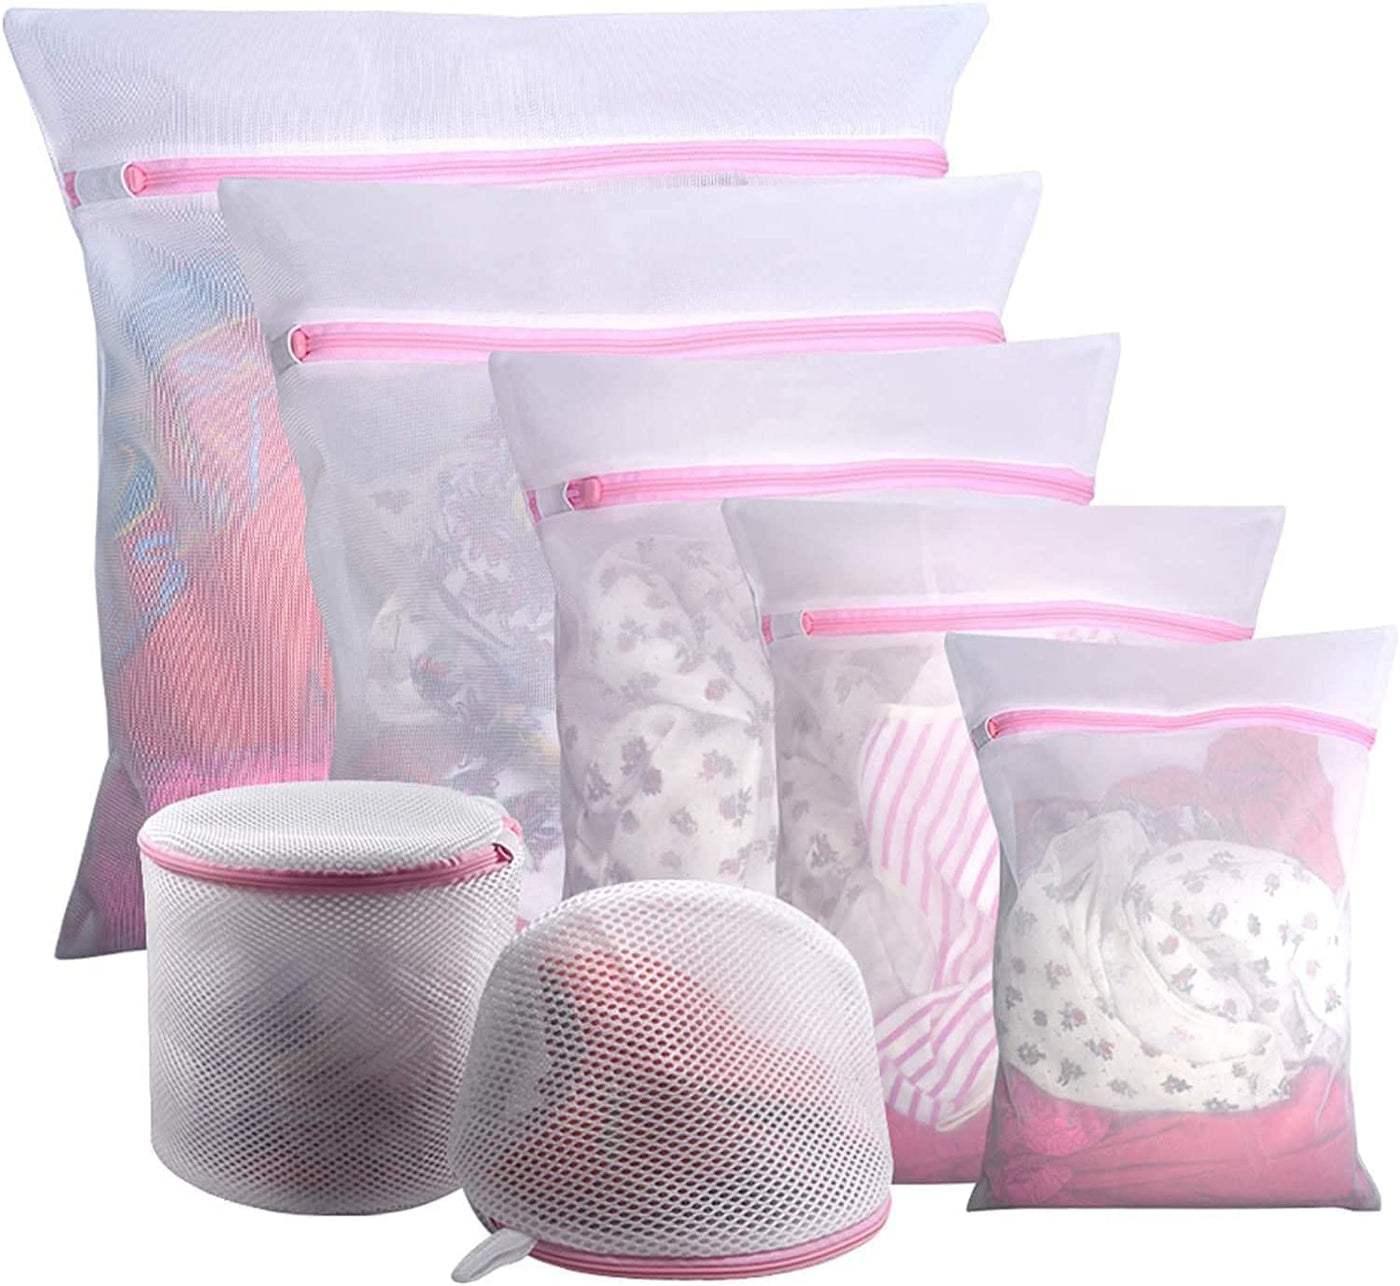 Dubkart Containers & Storage 7 PCS Mesh Laundry Storage Organizer Bags for Delicates